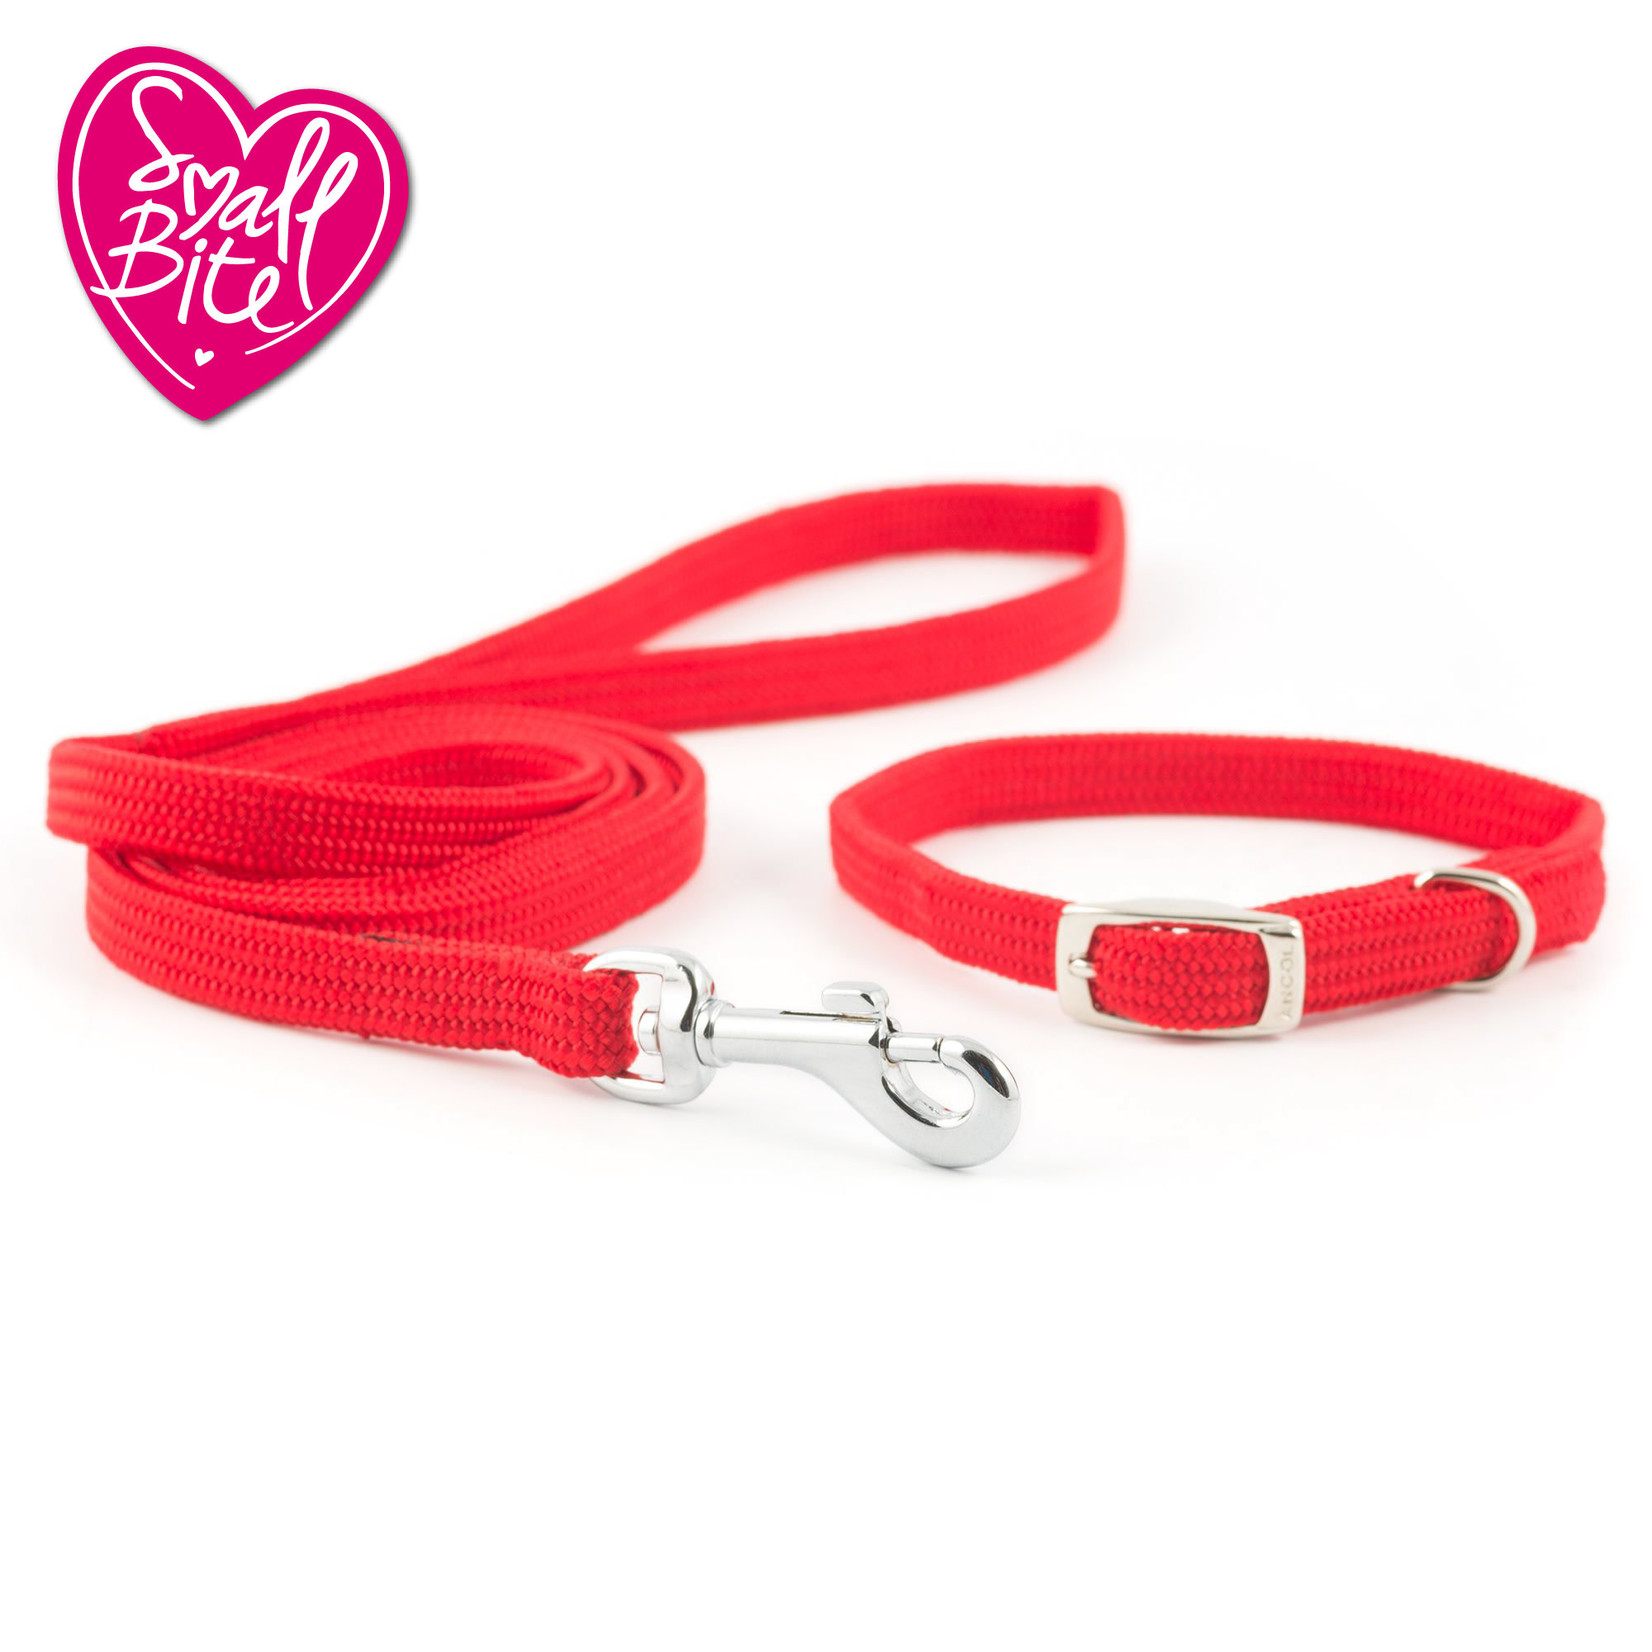 Ancol Small Bite Softweave Collar & Lead Set For Puppies & Small Dogs